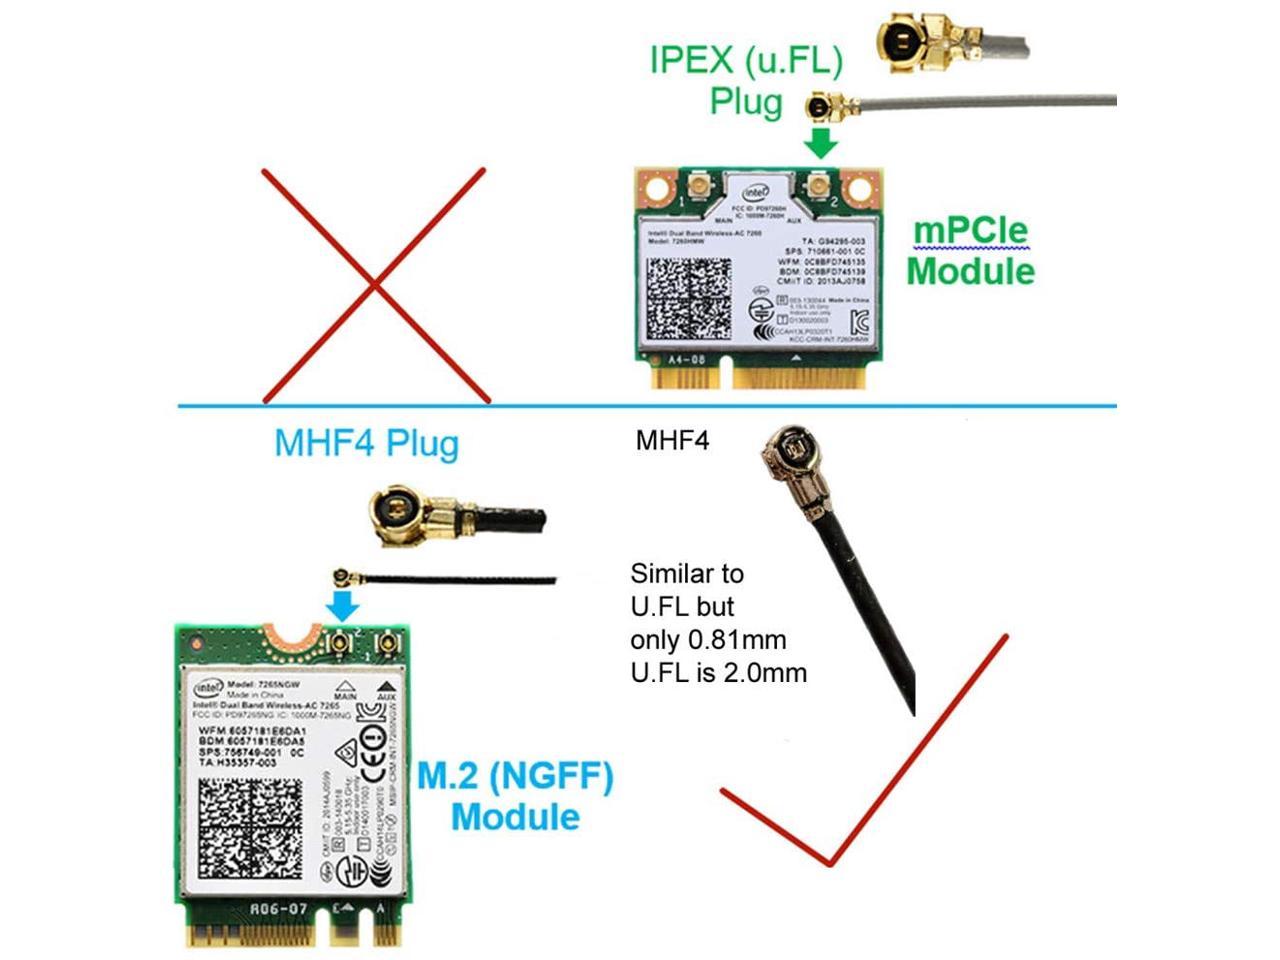 New A Pair NGFF Antenna of Ipex Mhf4 M2 2.4/5g Wifi Antennas Use For Intel 7260 7265 Ac 8260 Ngff Card 